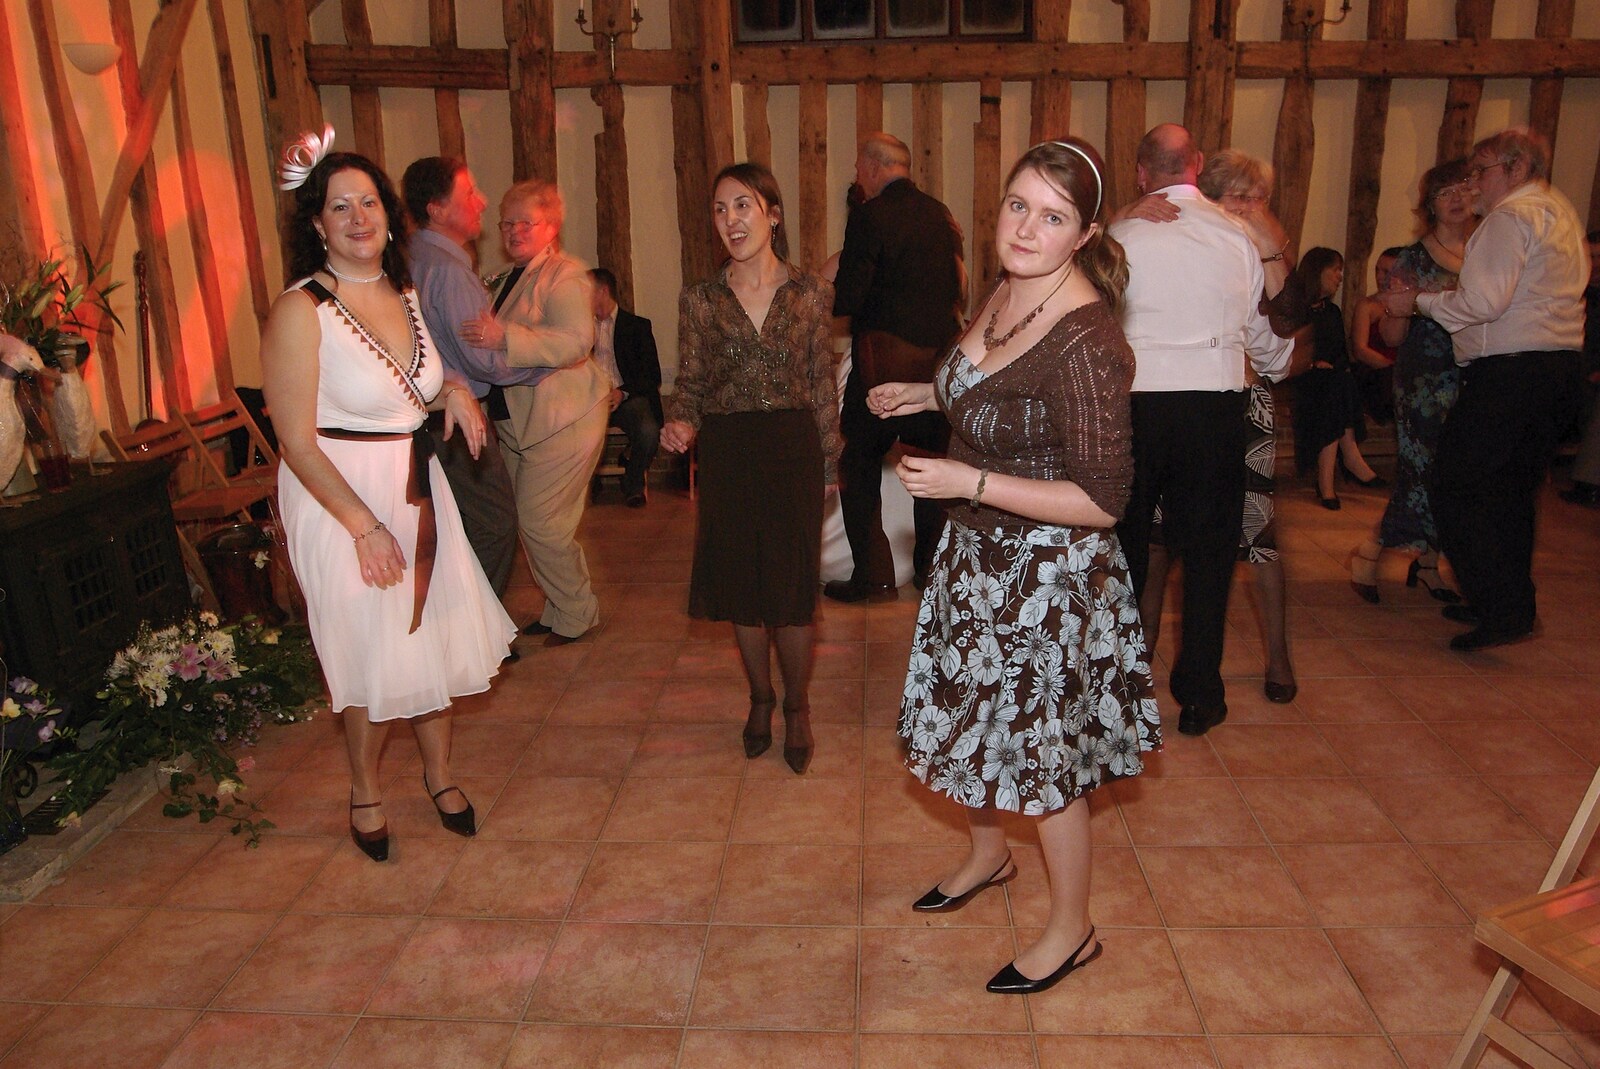 Clare, Carmen and Isobel show some moves from Gov and Rachel's Wedding, Thorndon, Suffolk - 2nd February 2008